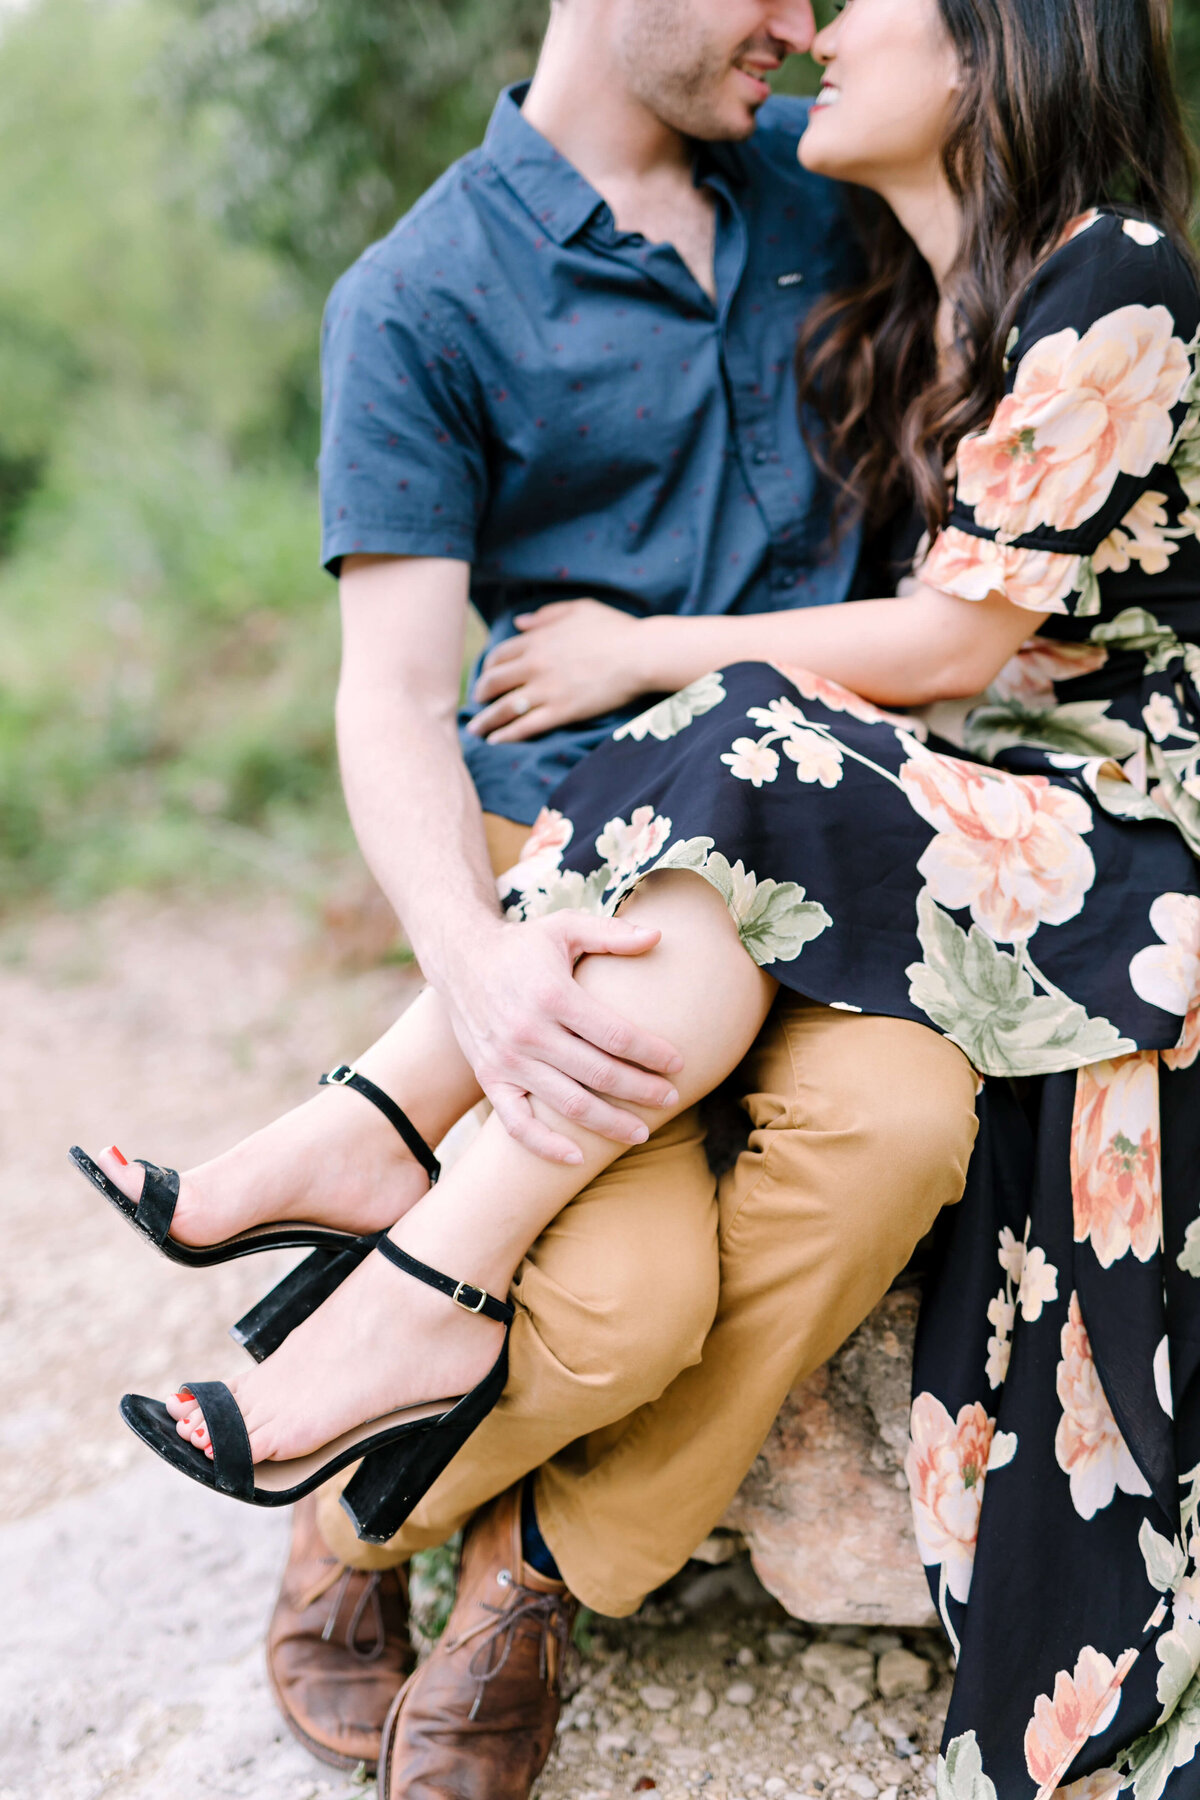 Angela and Eric’s portrait session at Bull Creek Park in Austin, Texas